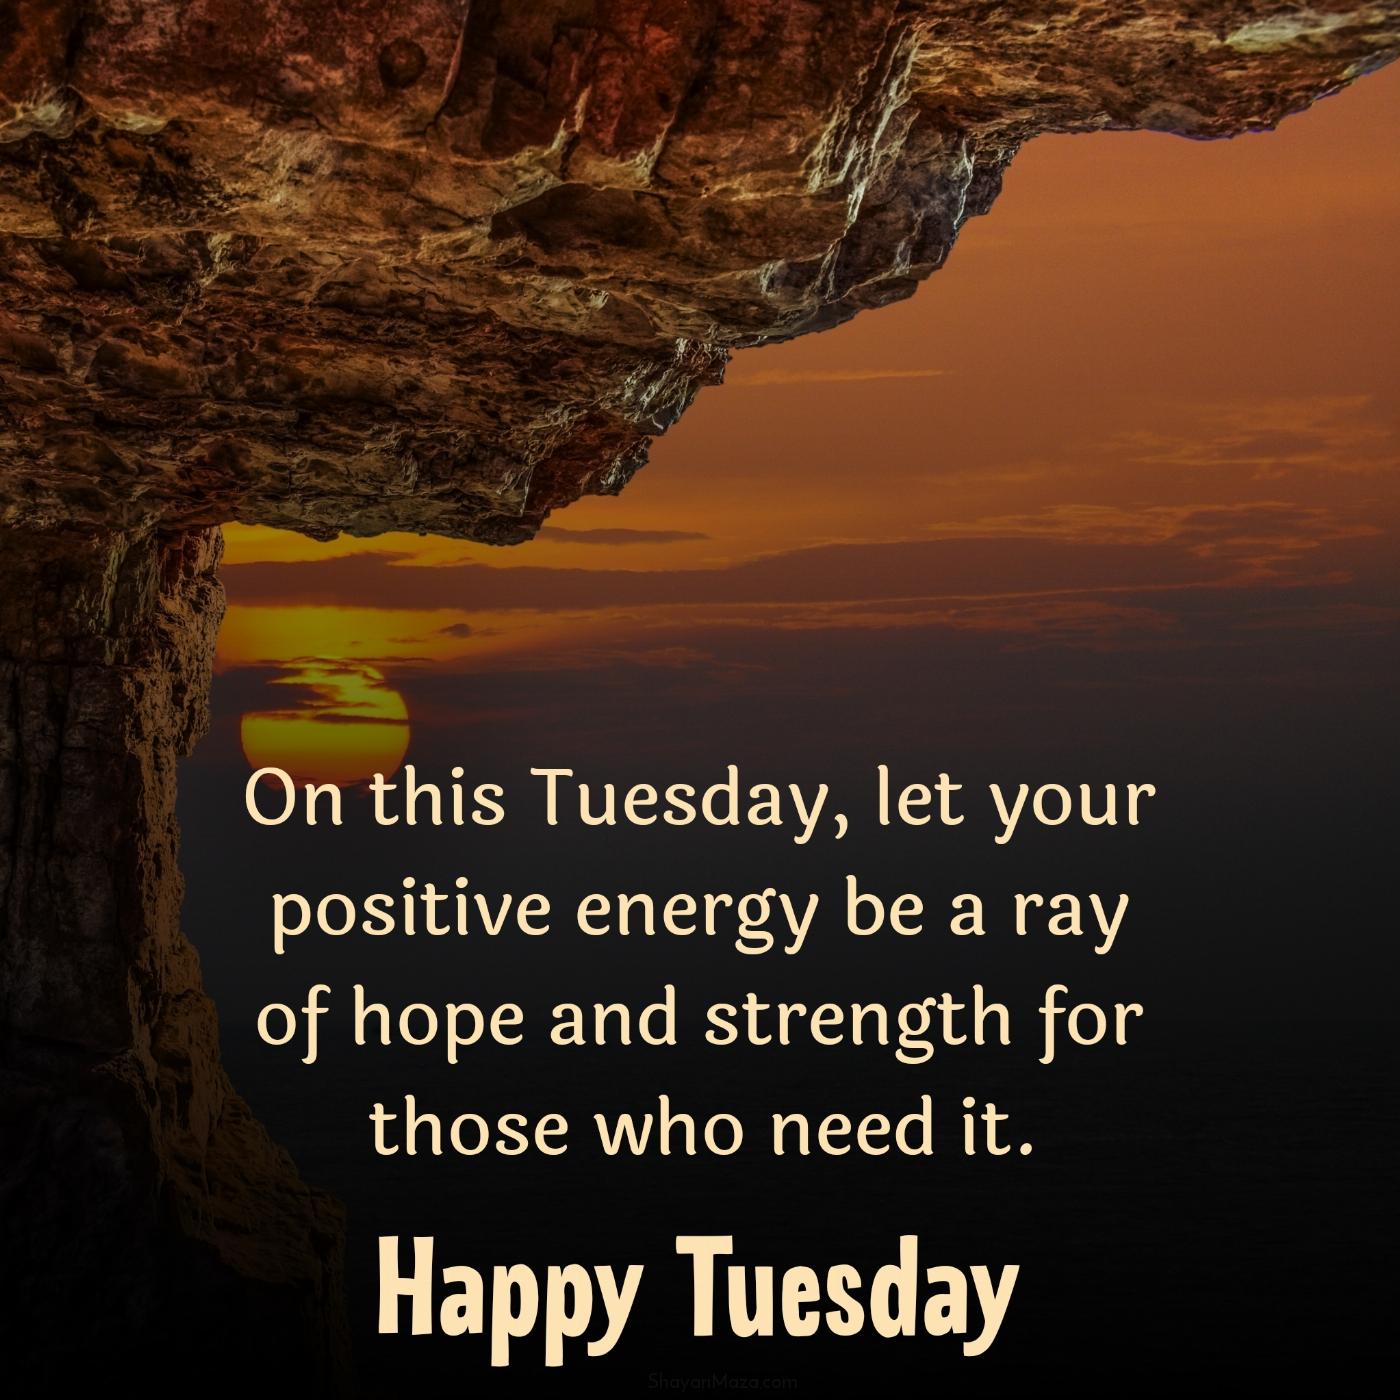 On this Tuesday let your positive energy be a ray of hope